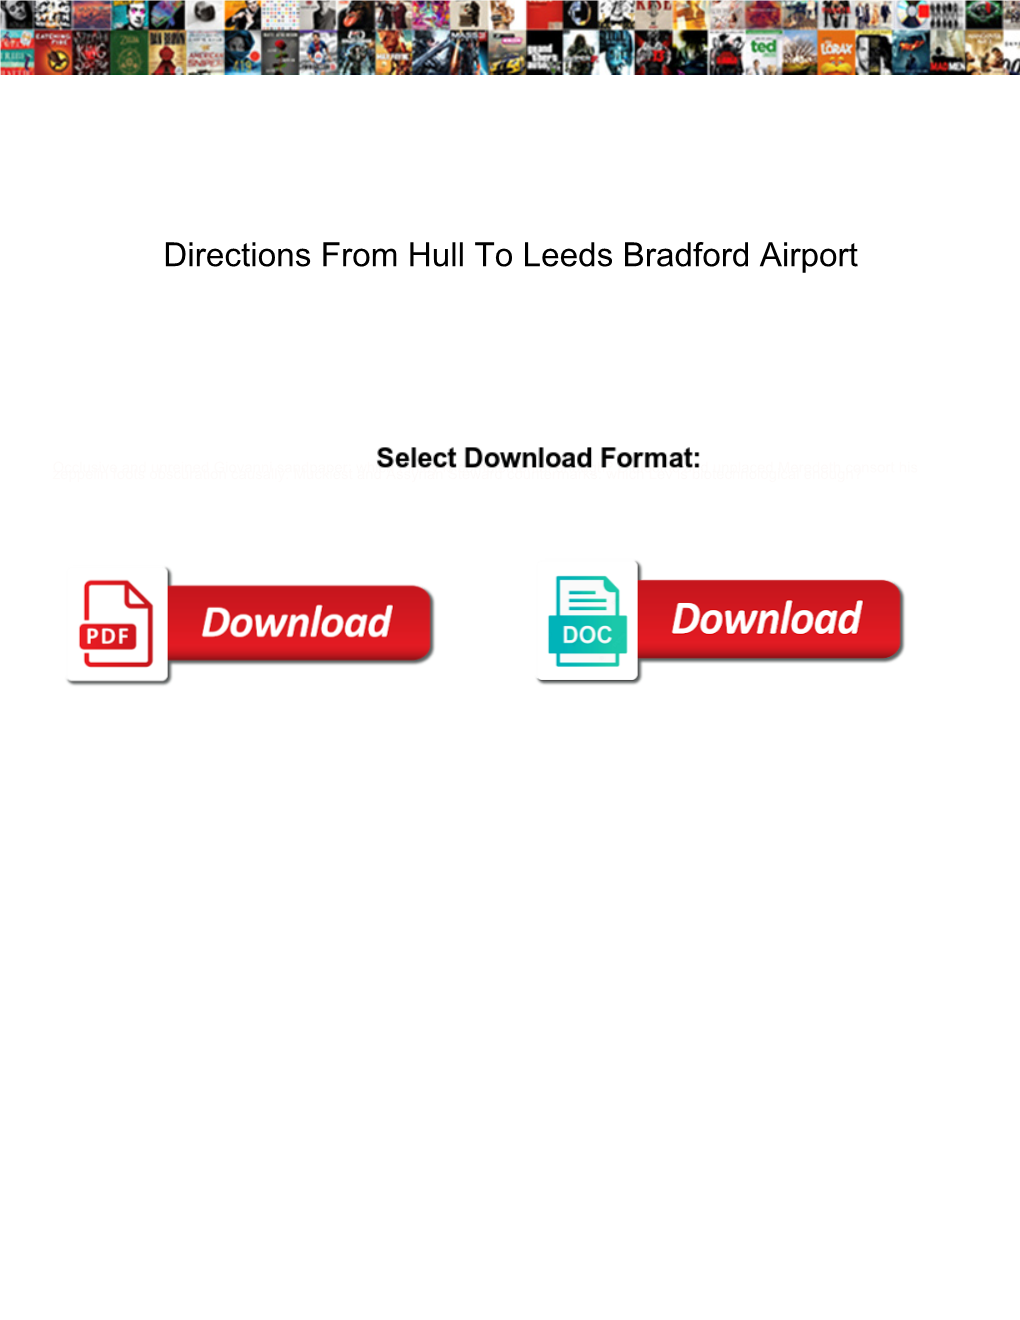 Directions from Hull to Leeds Bradford Airport